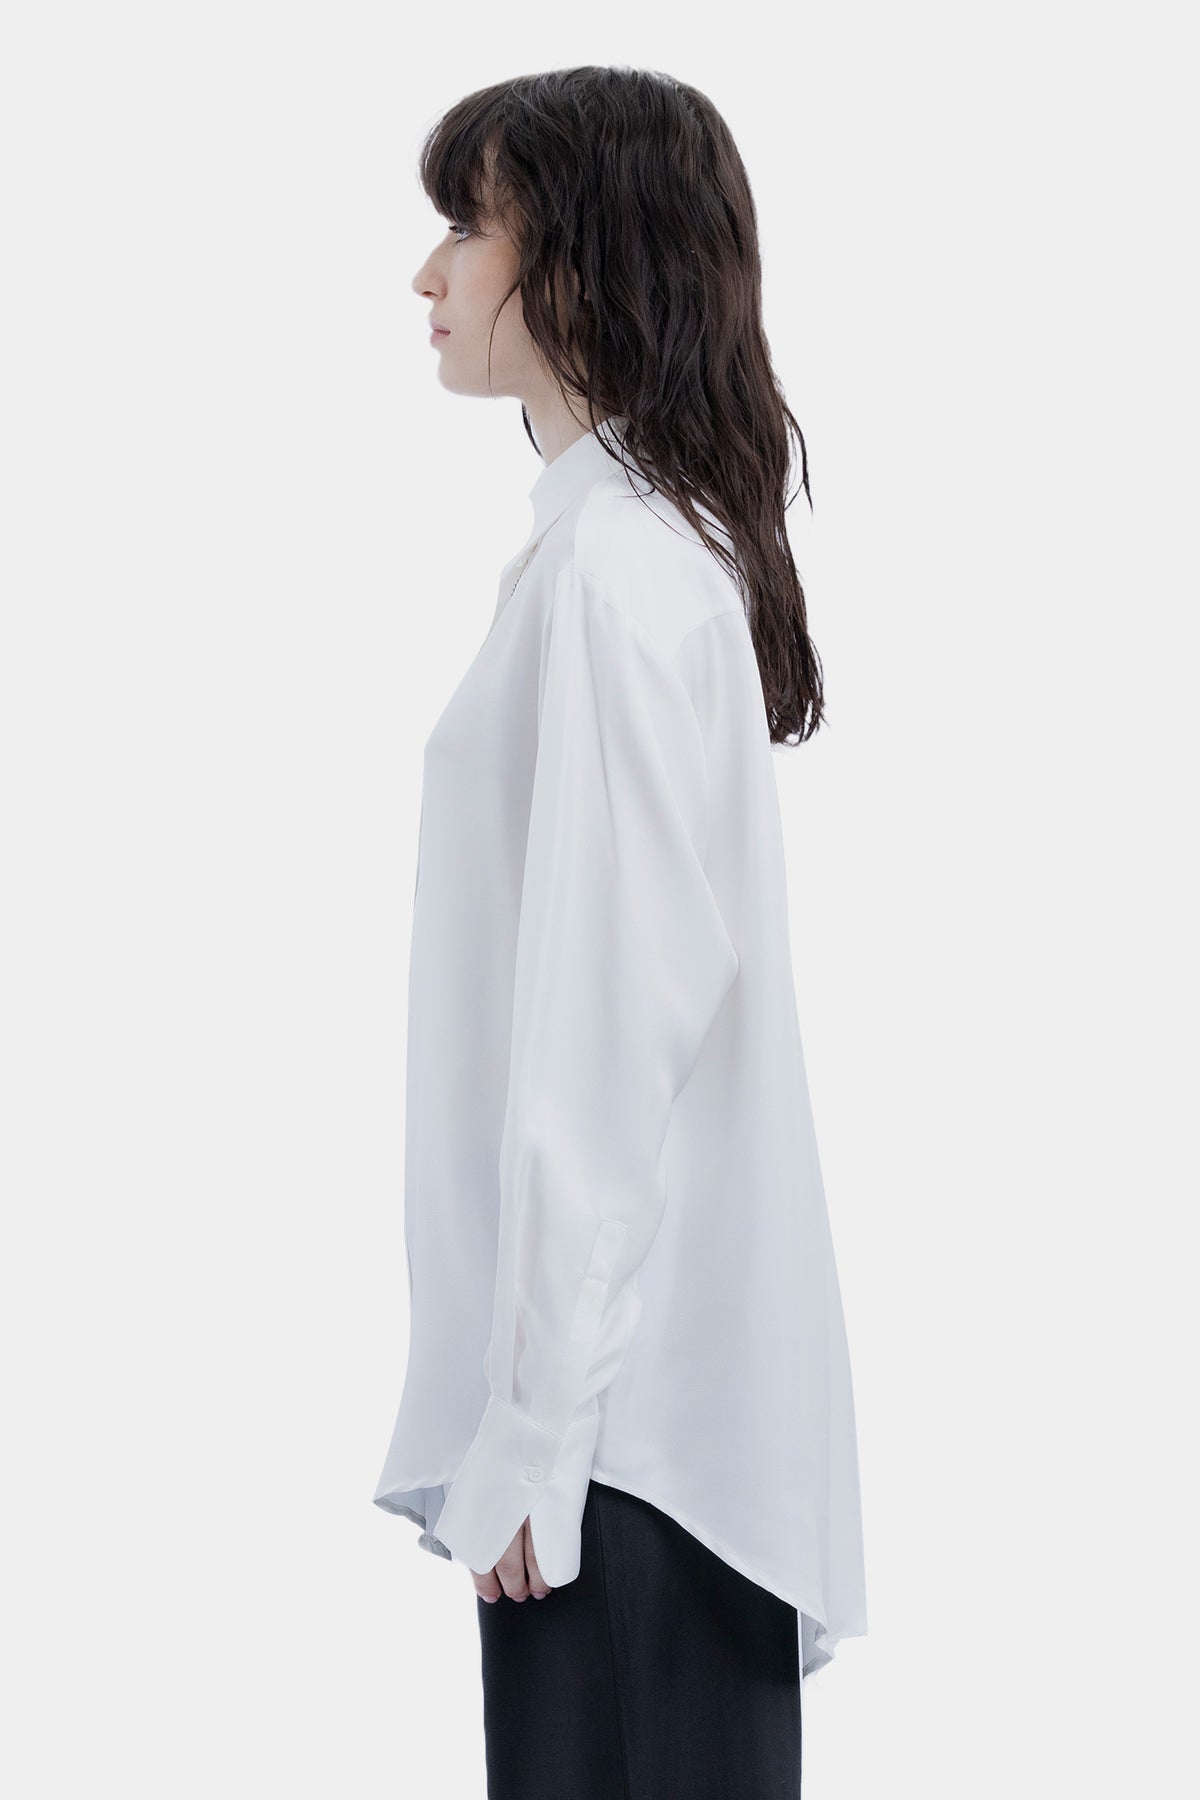 The Ladder Shirt By GINIA In White